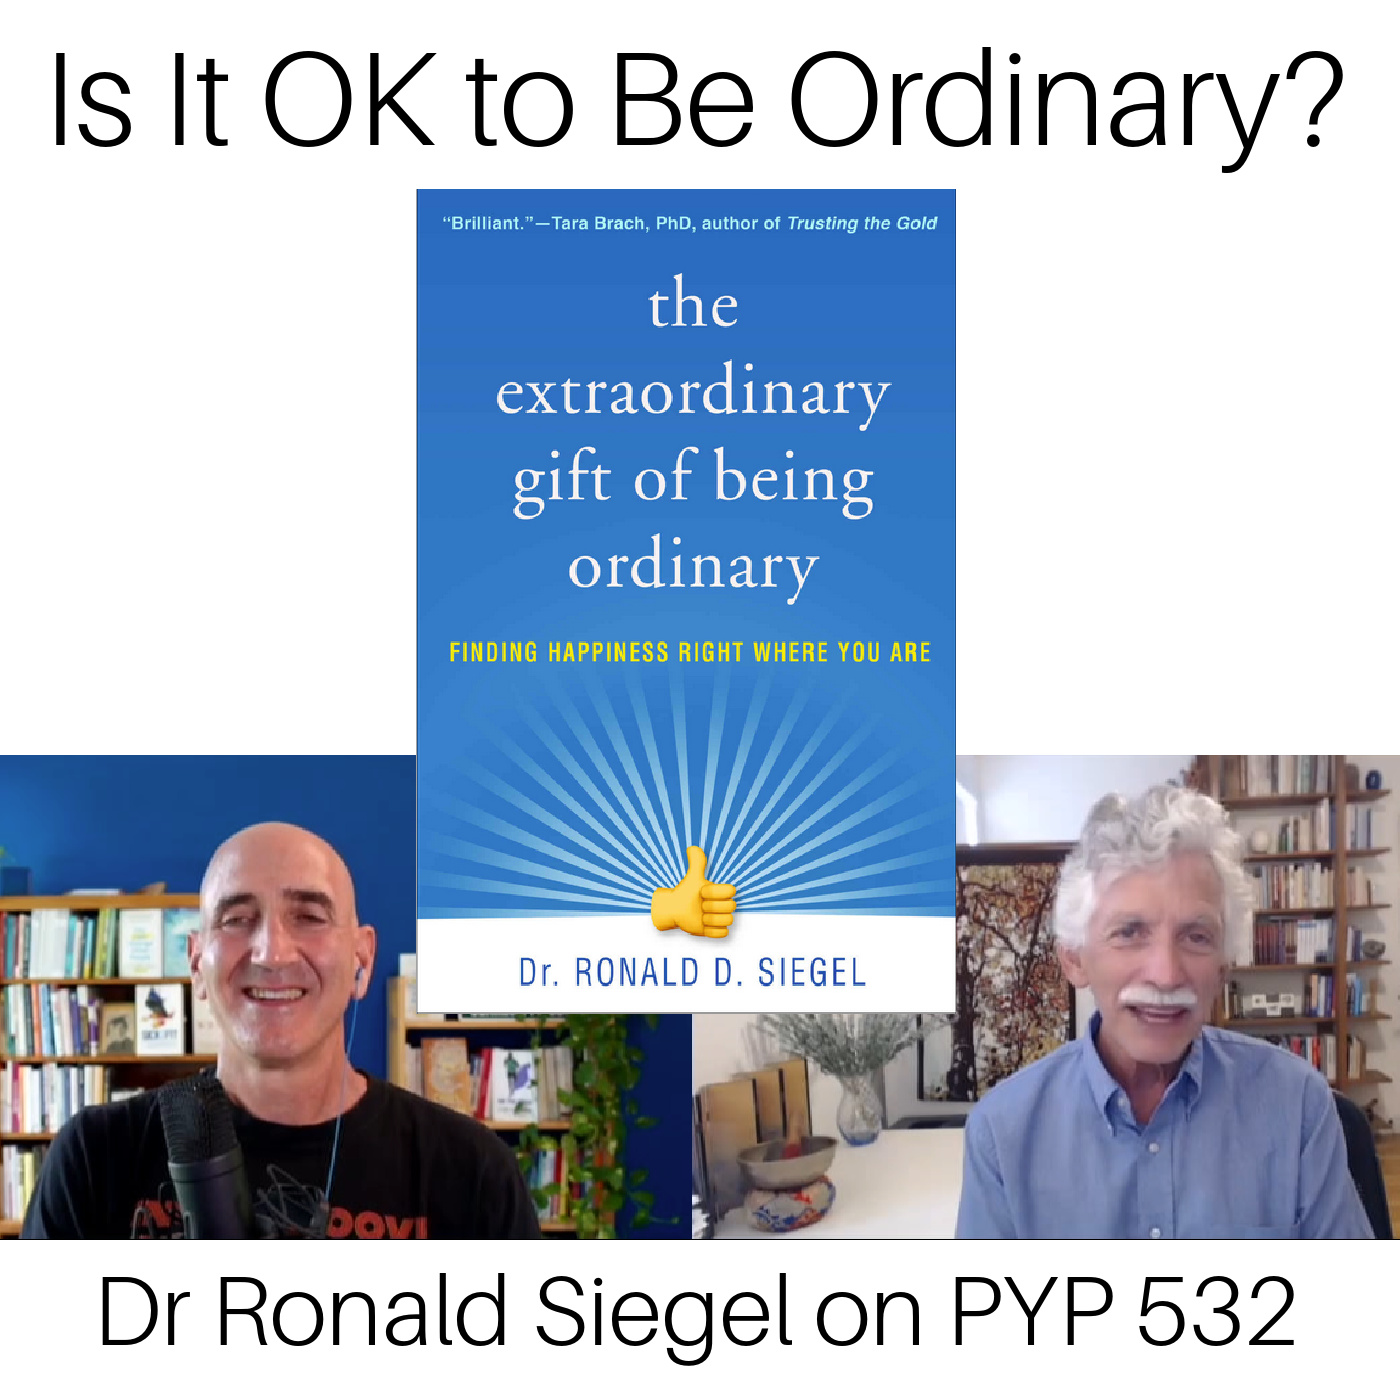 Is It OK to be Ordinary?: Dr Ronald Siegel on PYP 532